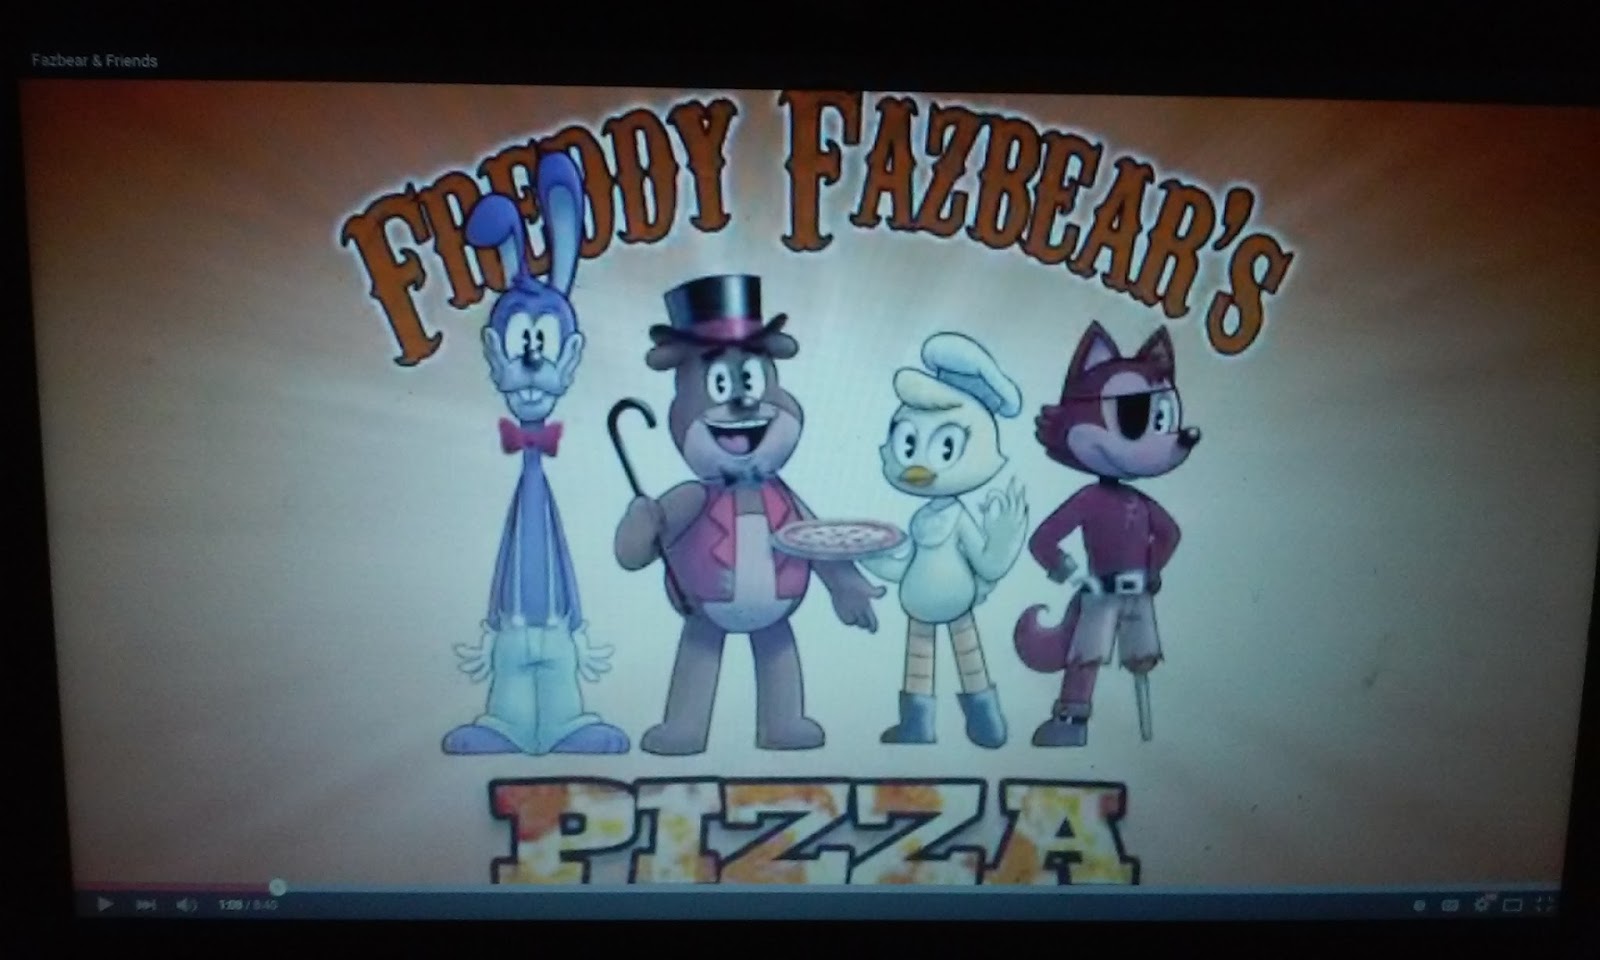 Freddy Fazbear and his friends!  Five nights at freddy's, Five night,  Freddy fazbear